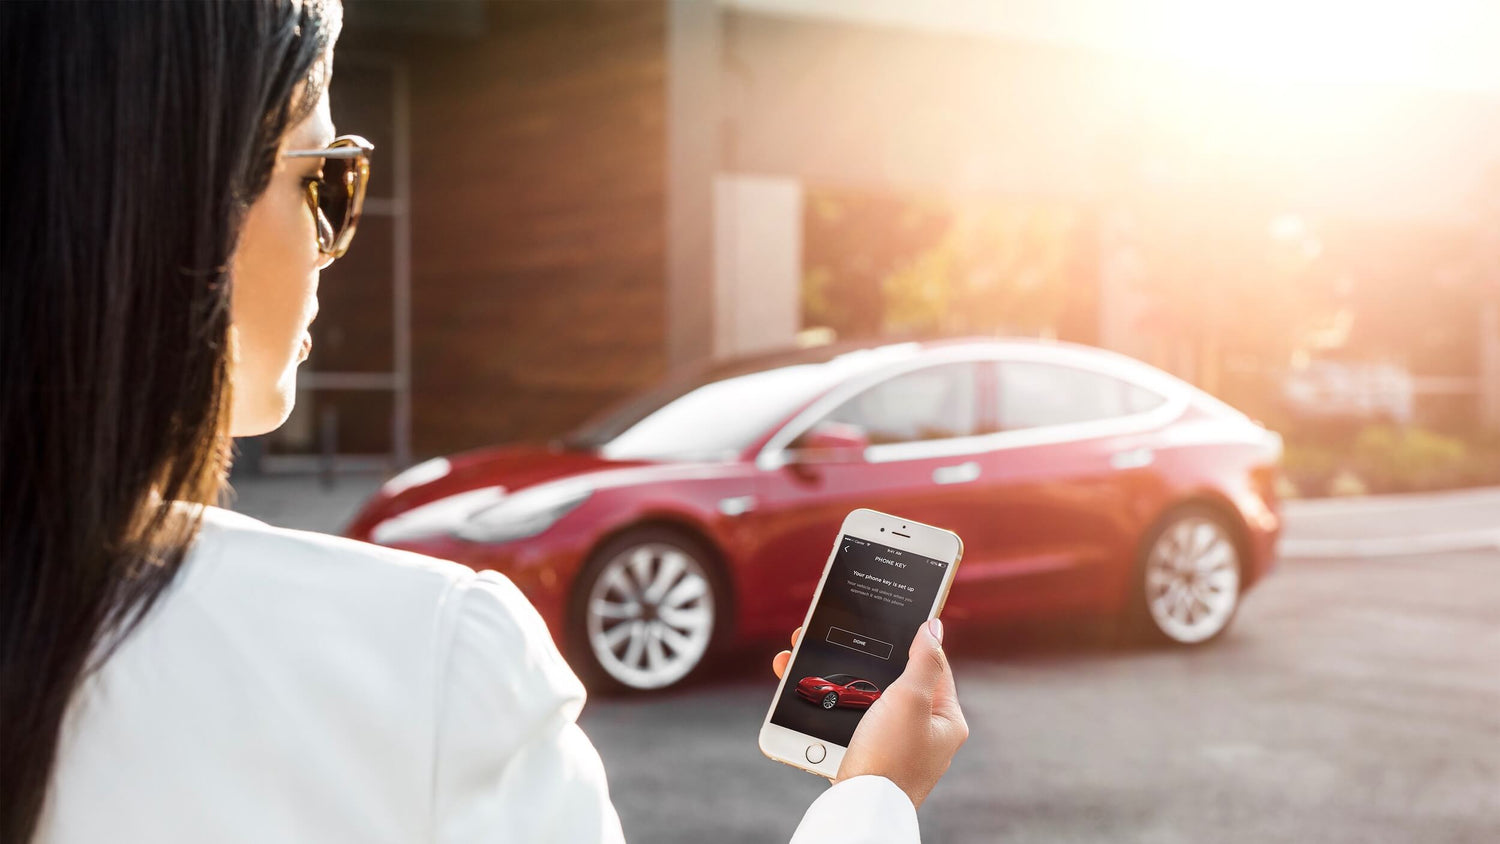 Tesla Working on Double Security 2FA to Improve Vehicle Safety